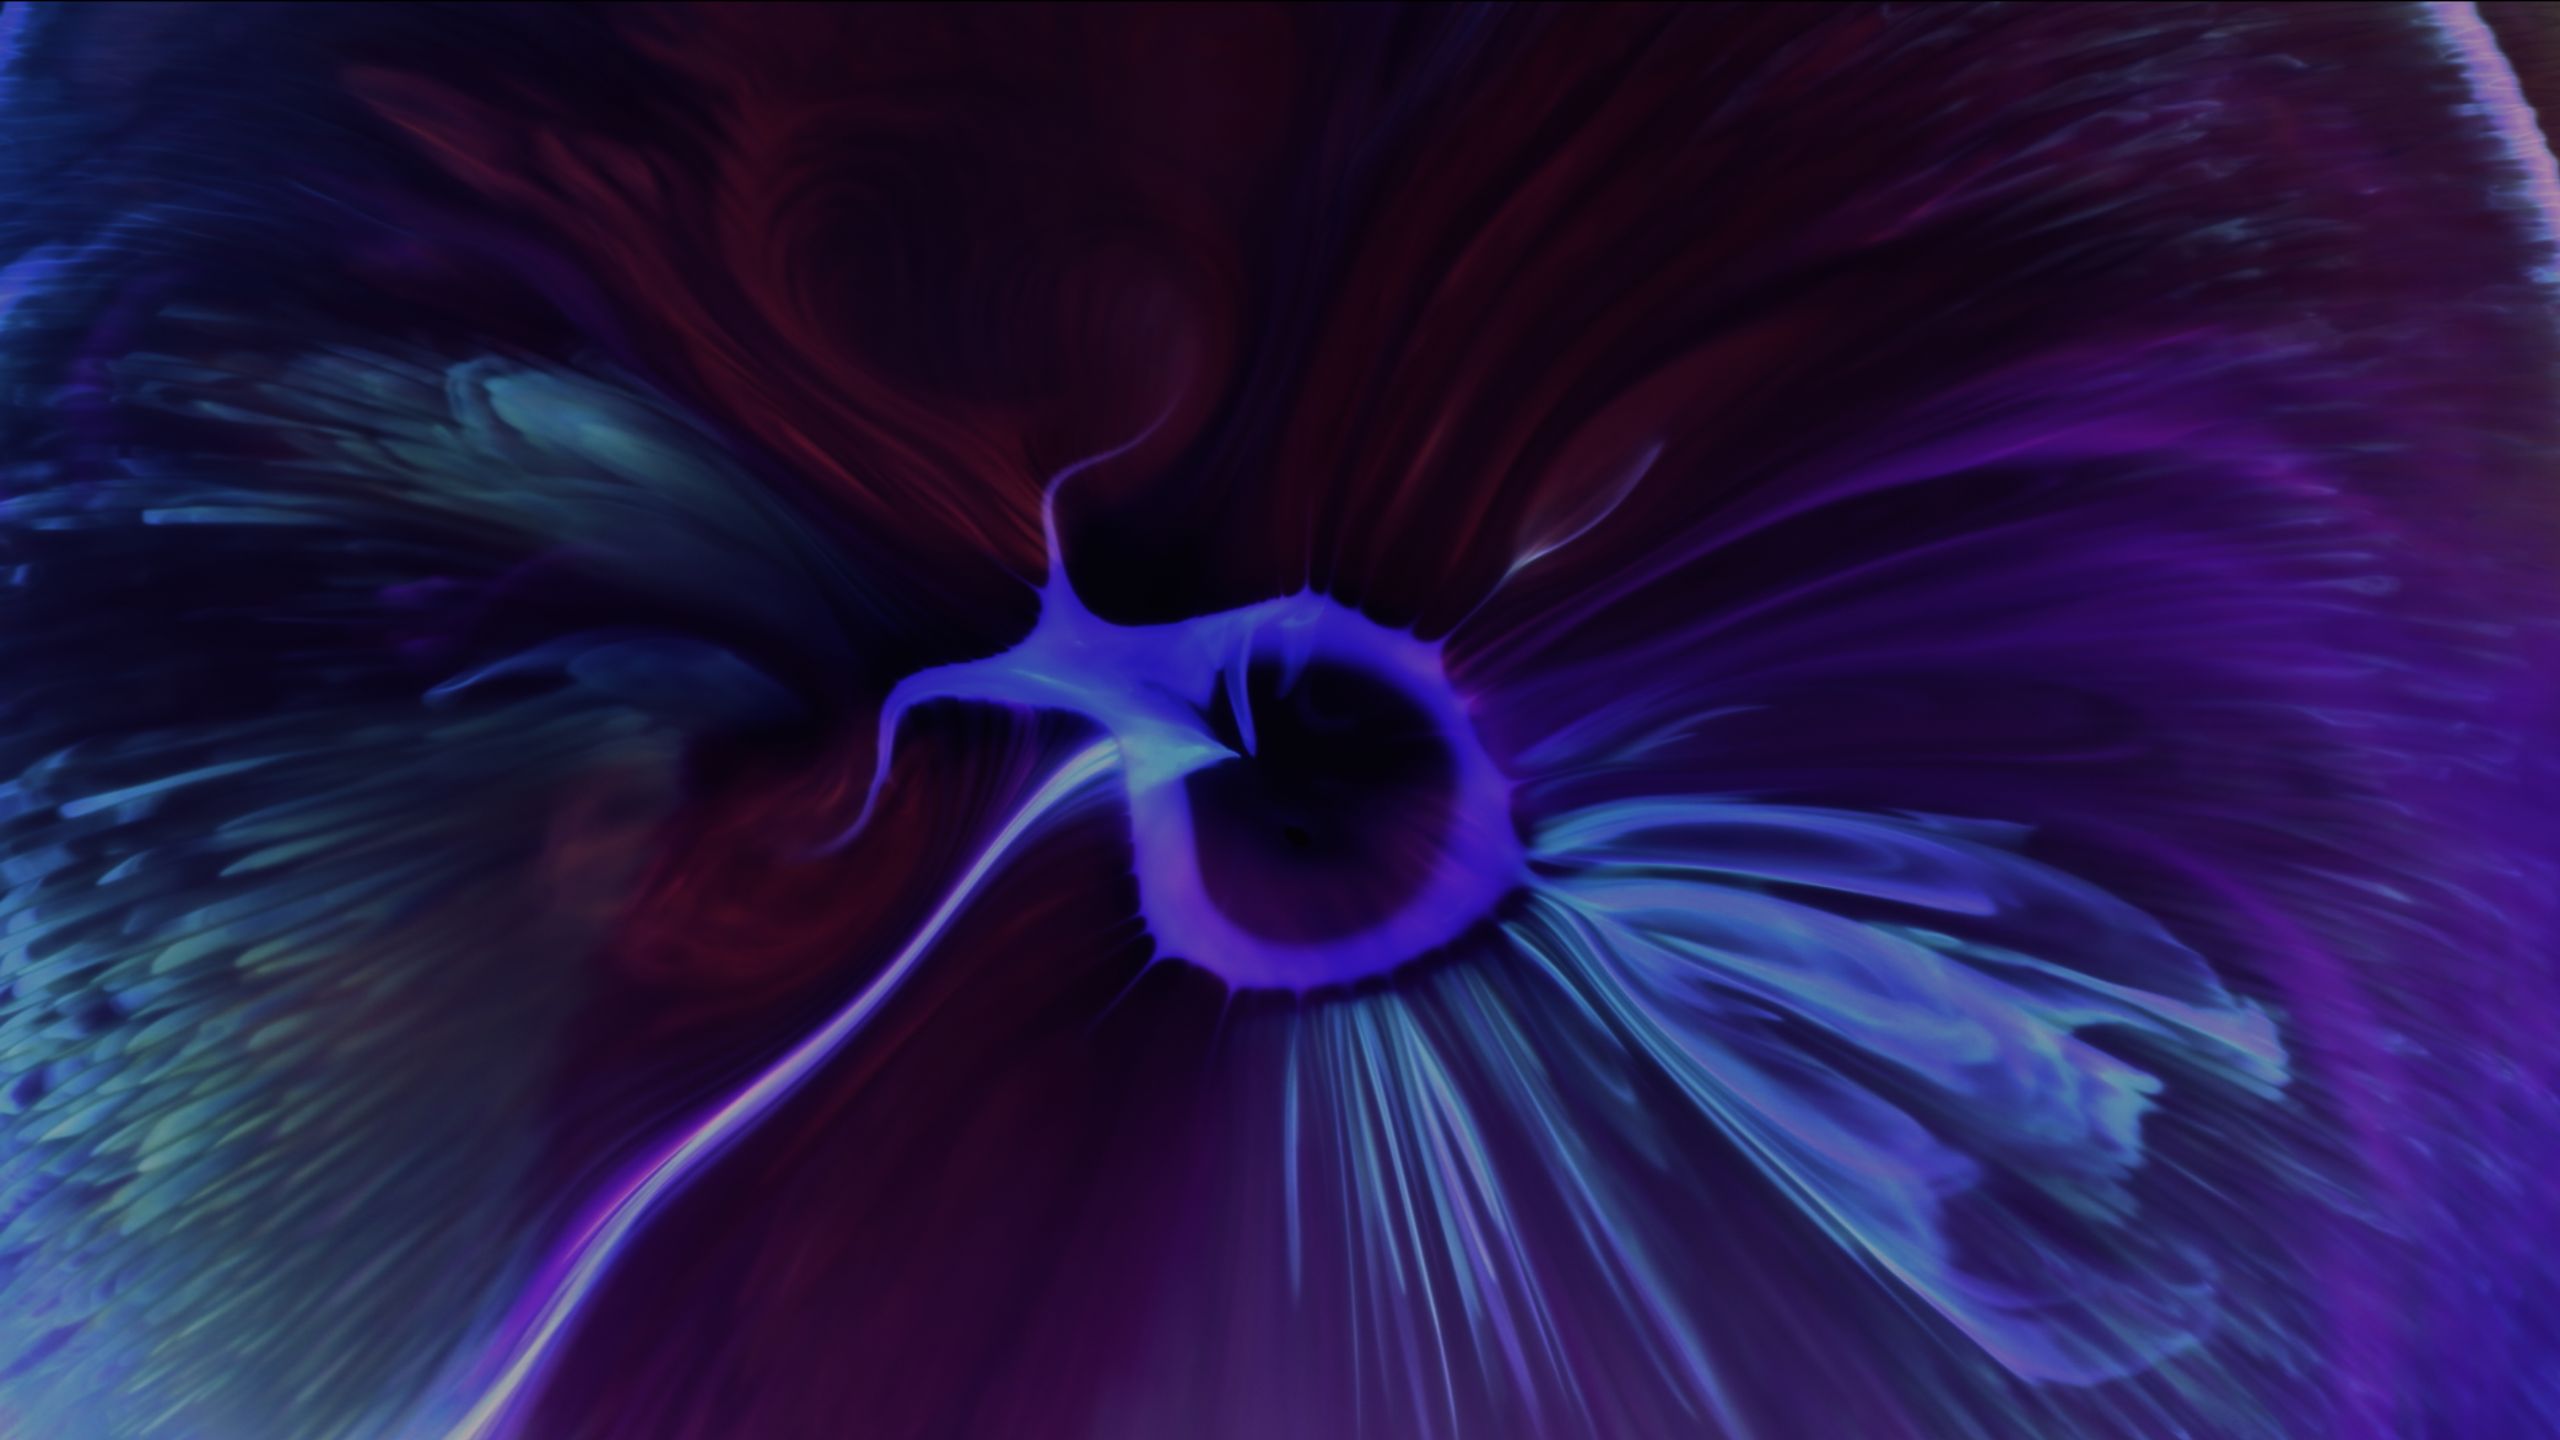 Blue and purple ink flow out from the center in an abstract photograph